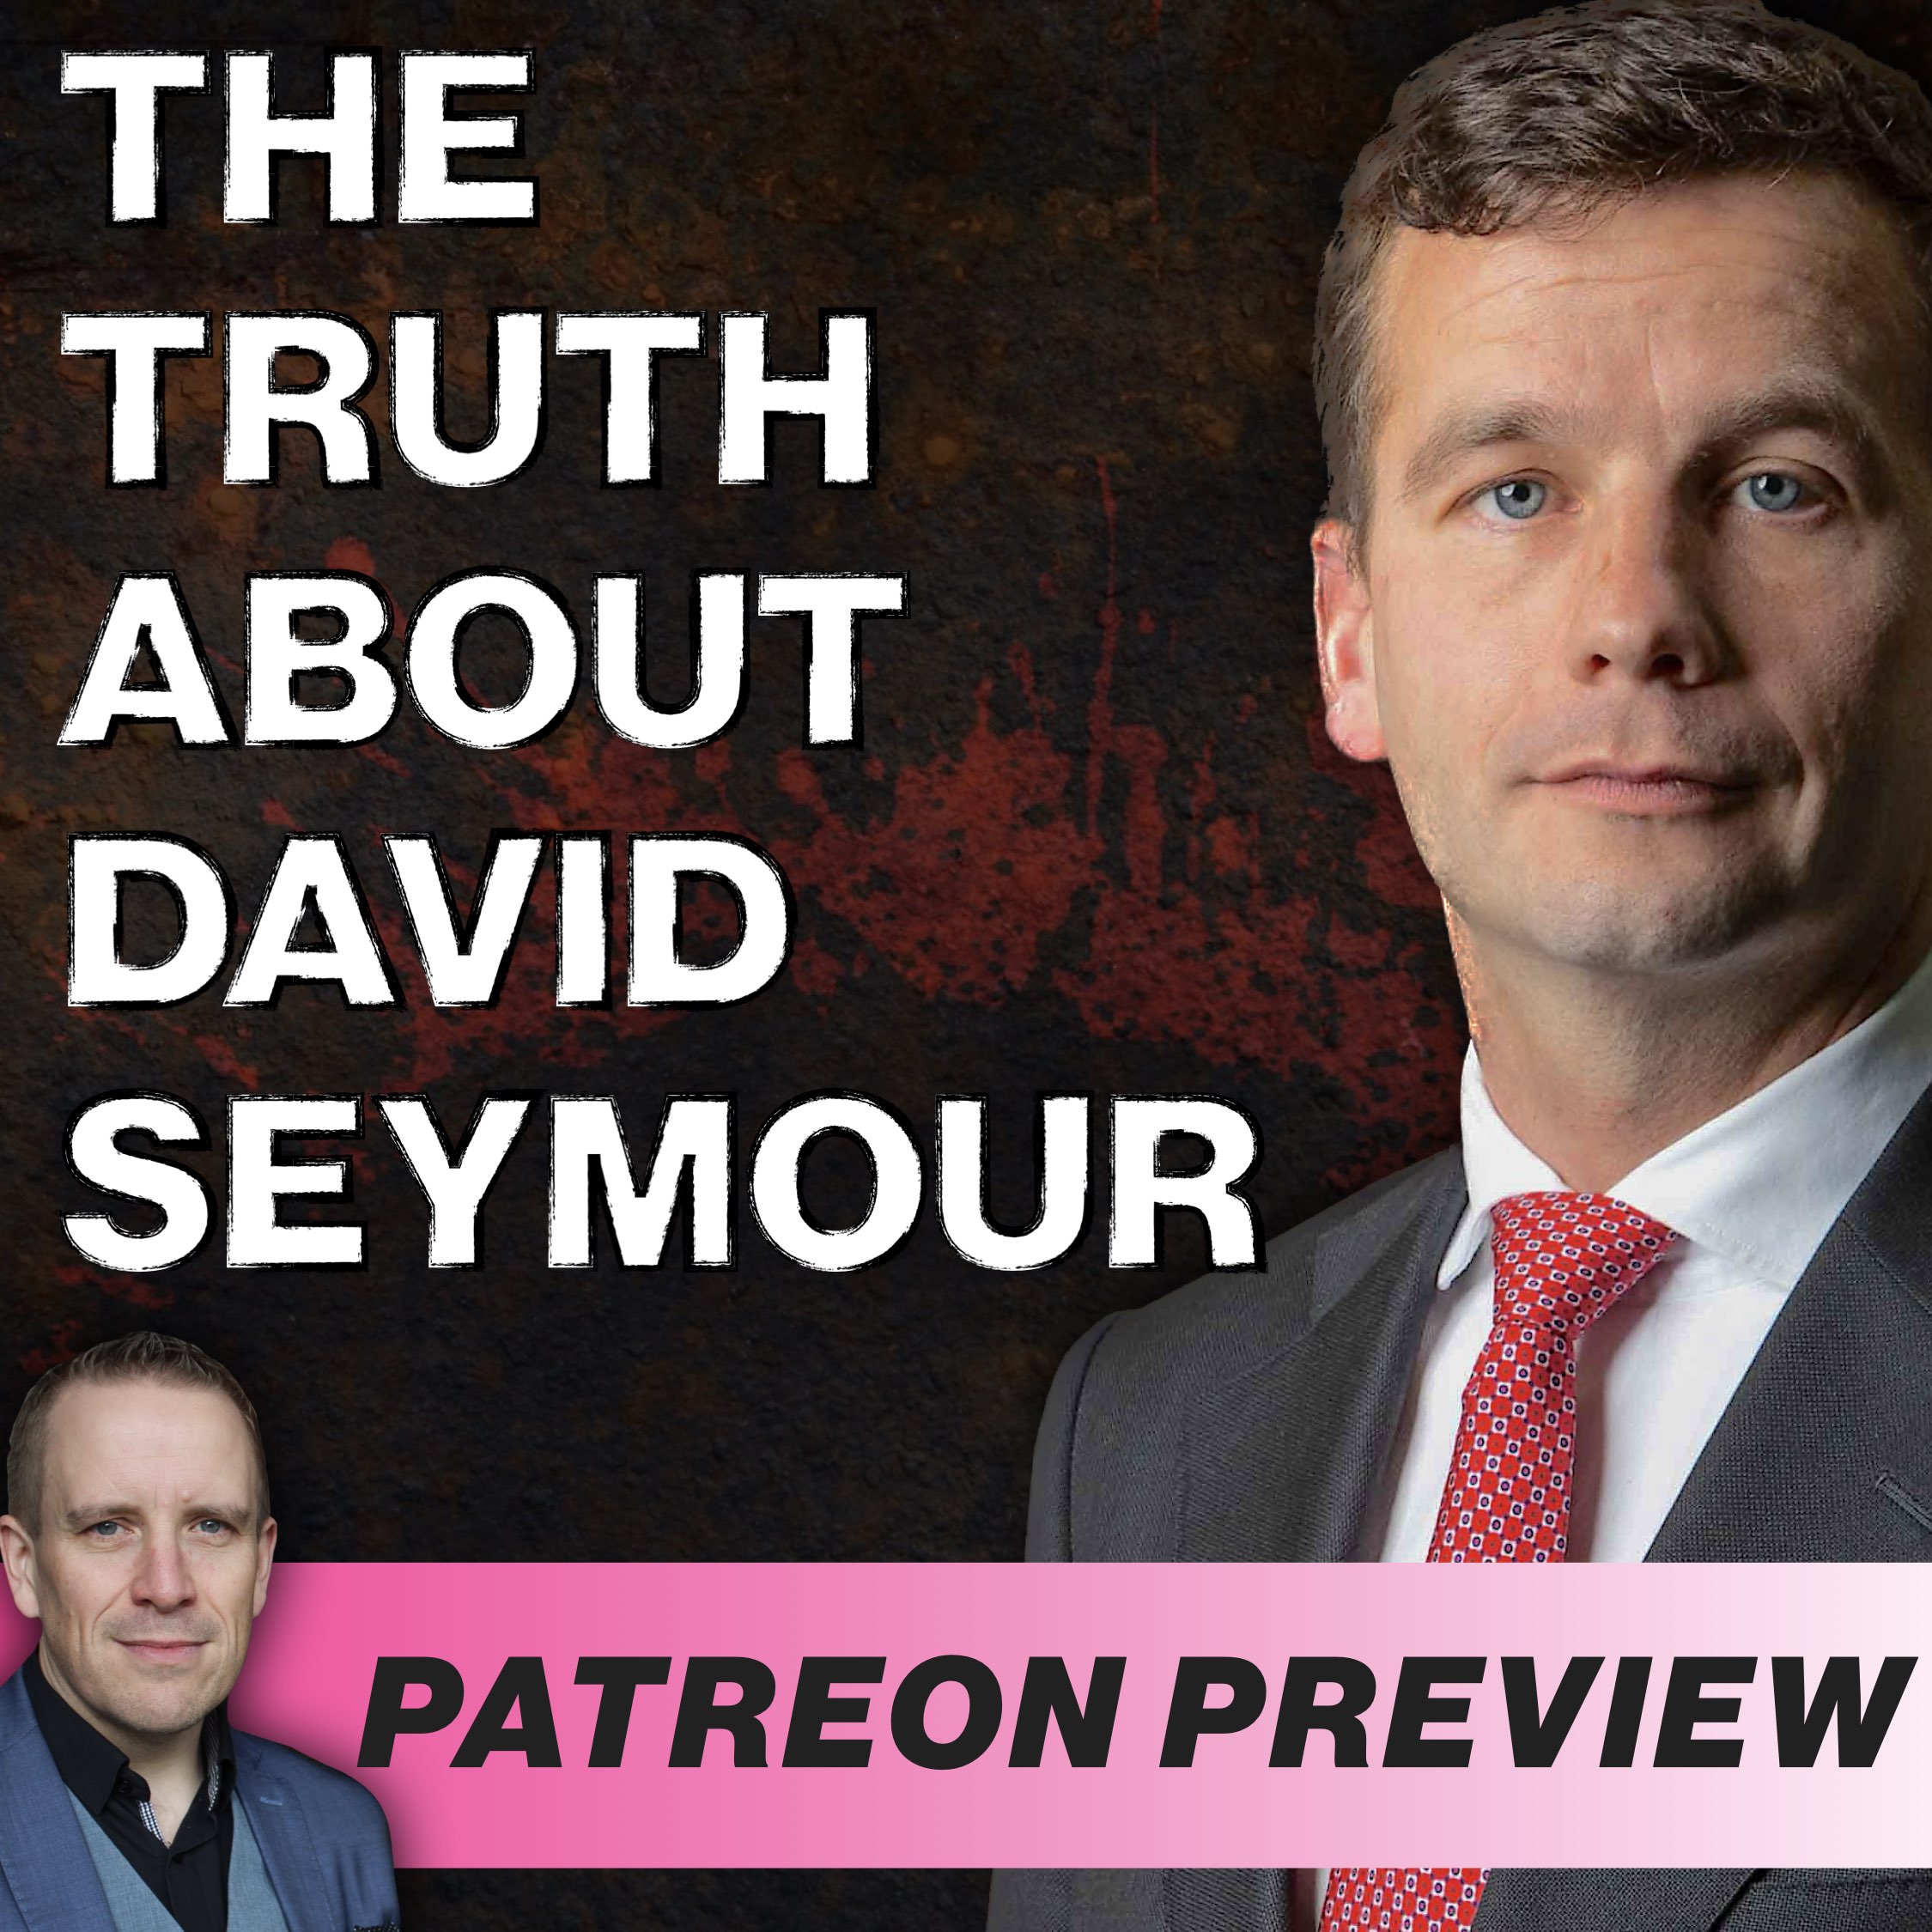 The Truth about David Seymour (Patreon Preview)